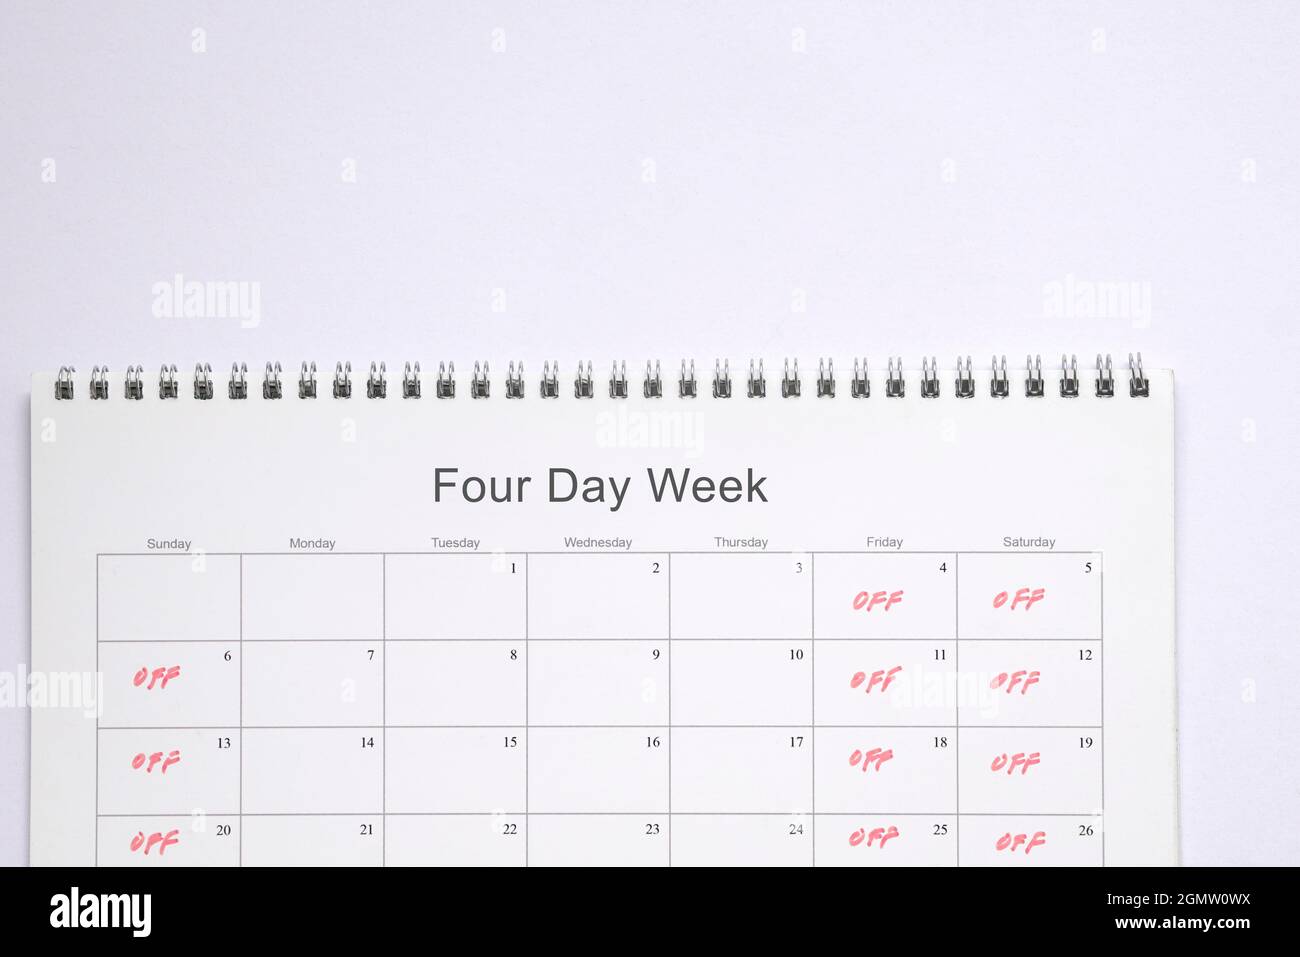 Calendar with four day work week, off on Friday, Saturday and Sunday. Copy space. Stock Photo